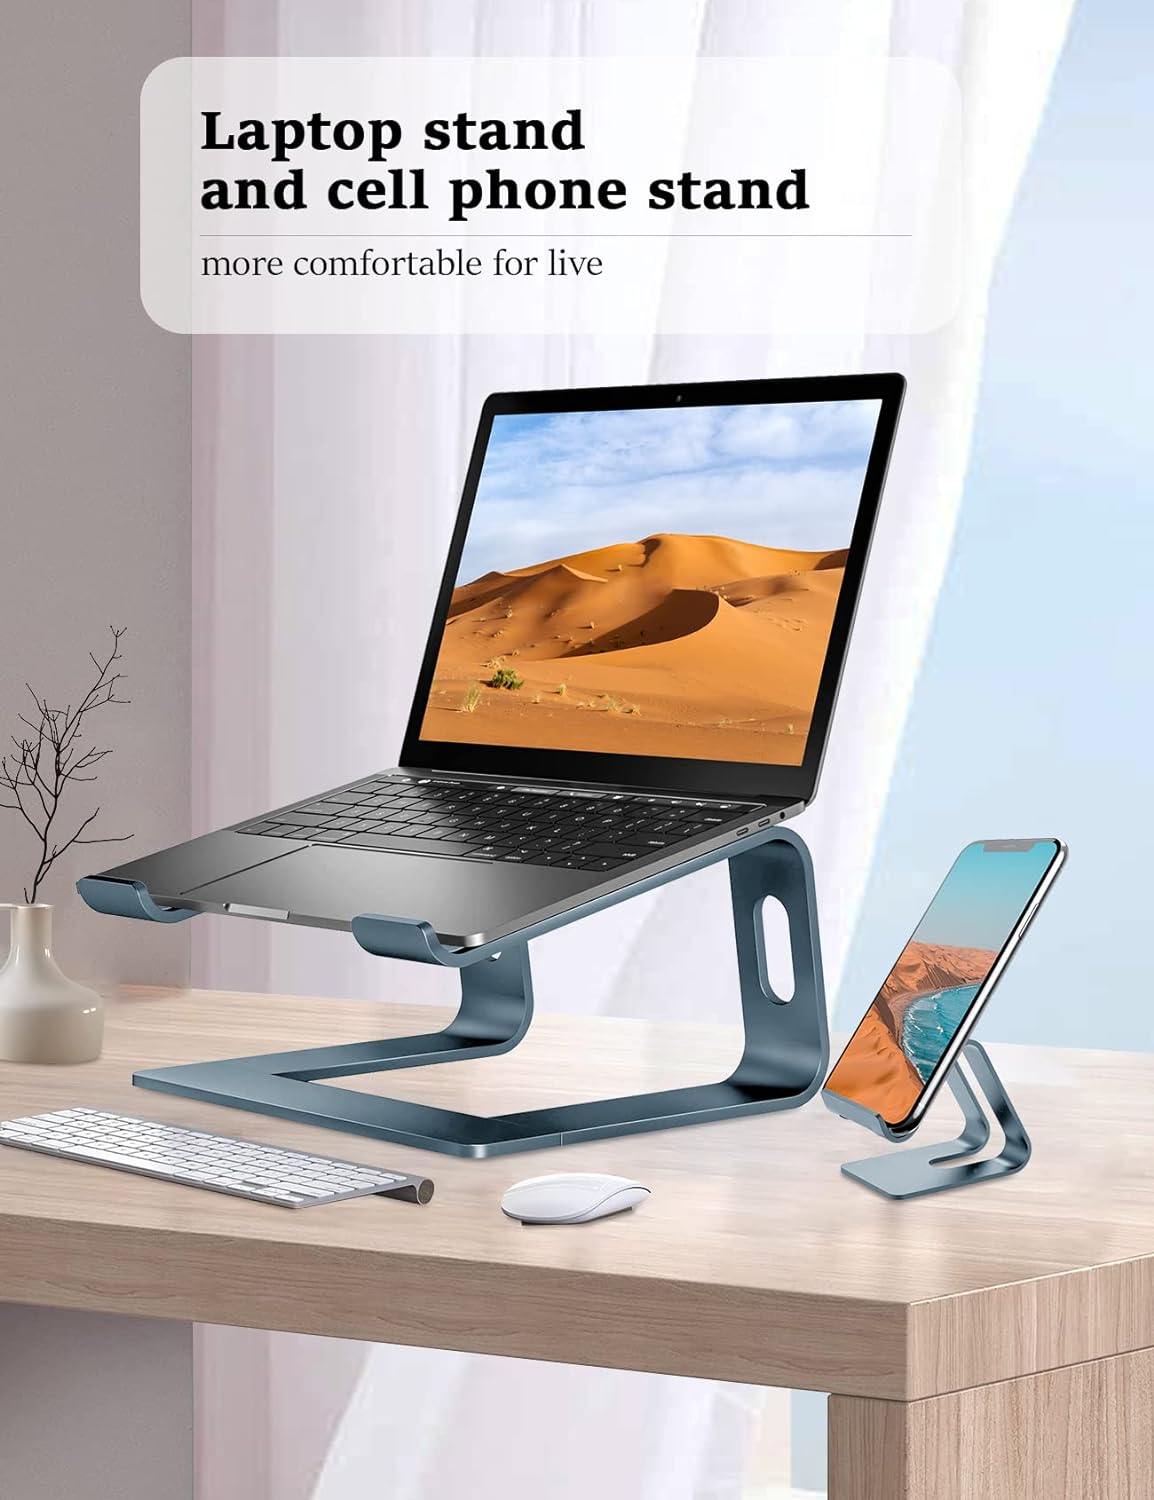 VOCOFO Laptop Stand for Desk Aluminum Laptop Riser Holder,with Cell Phone Stand(Gray)